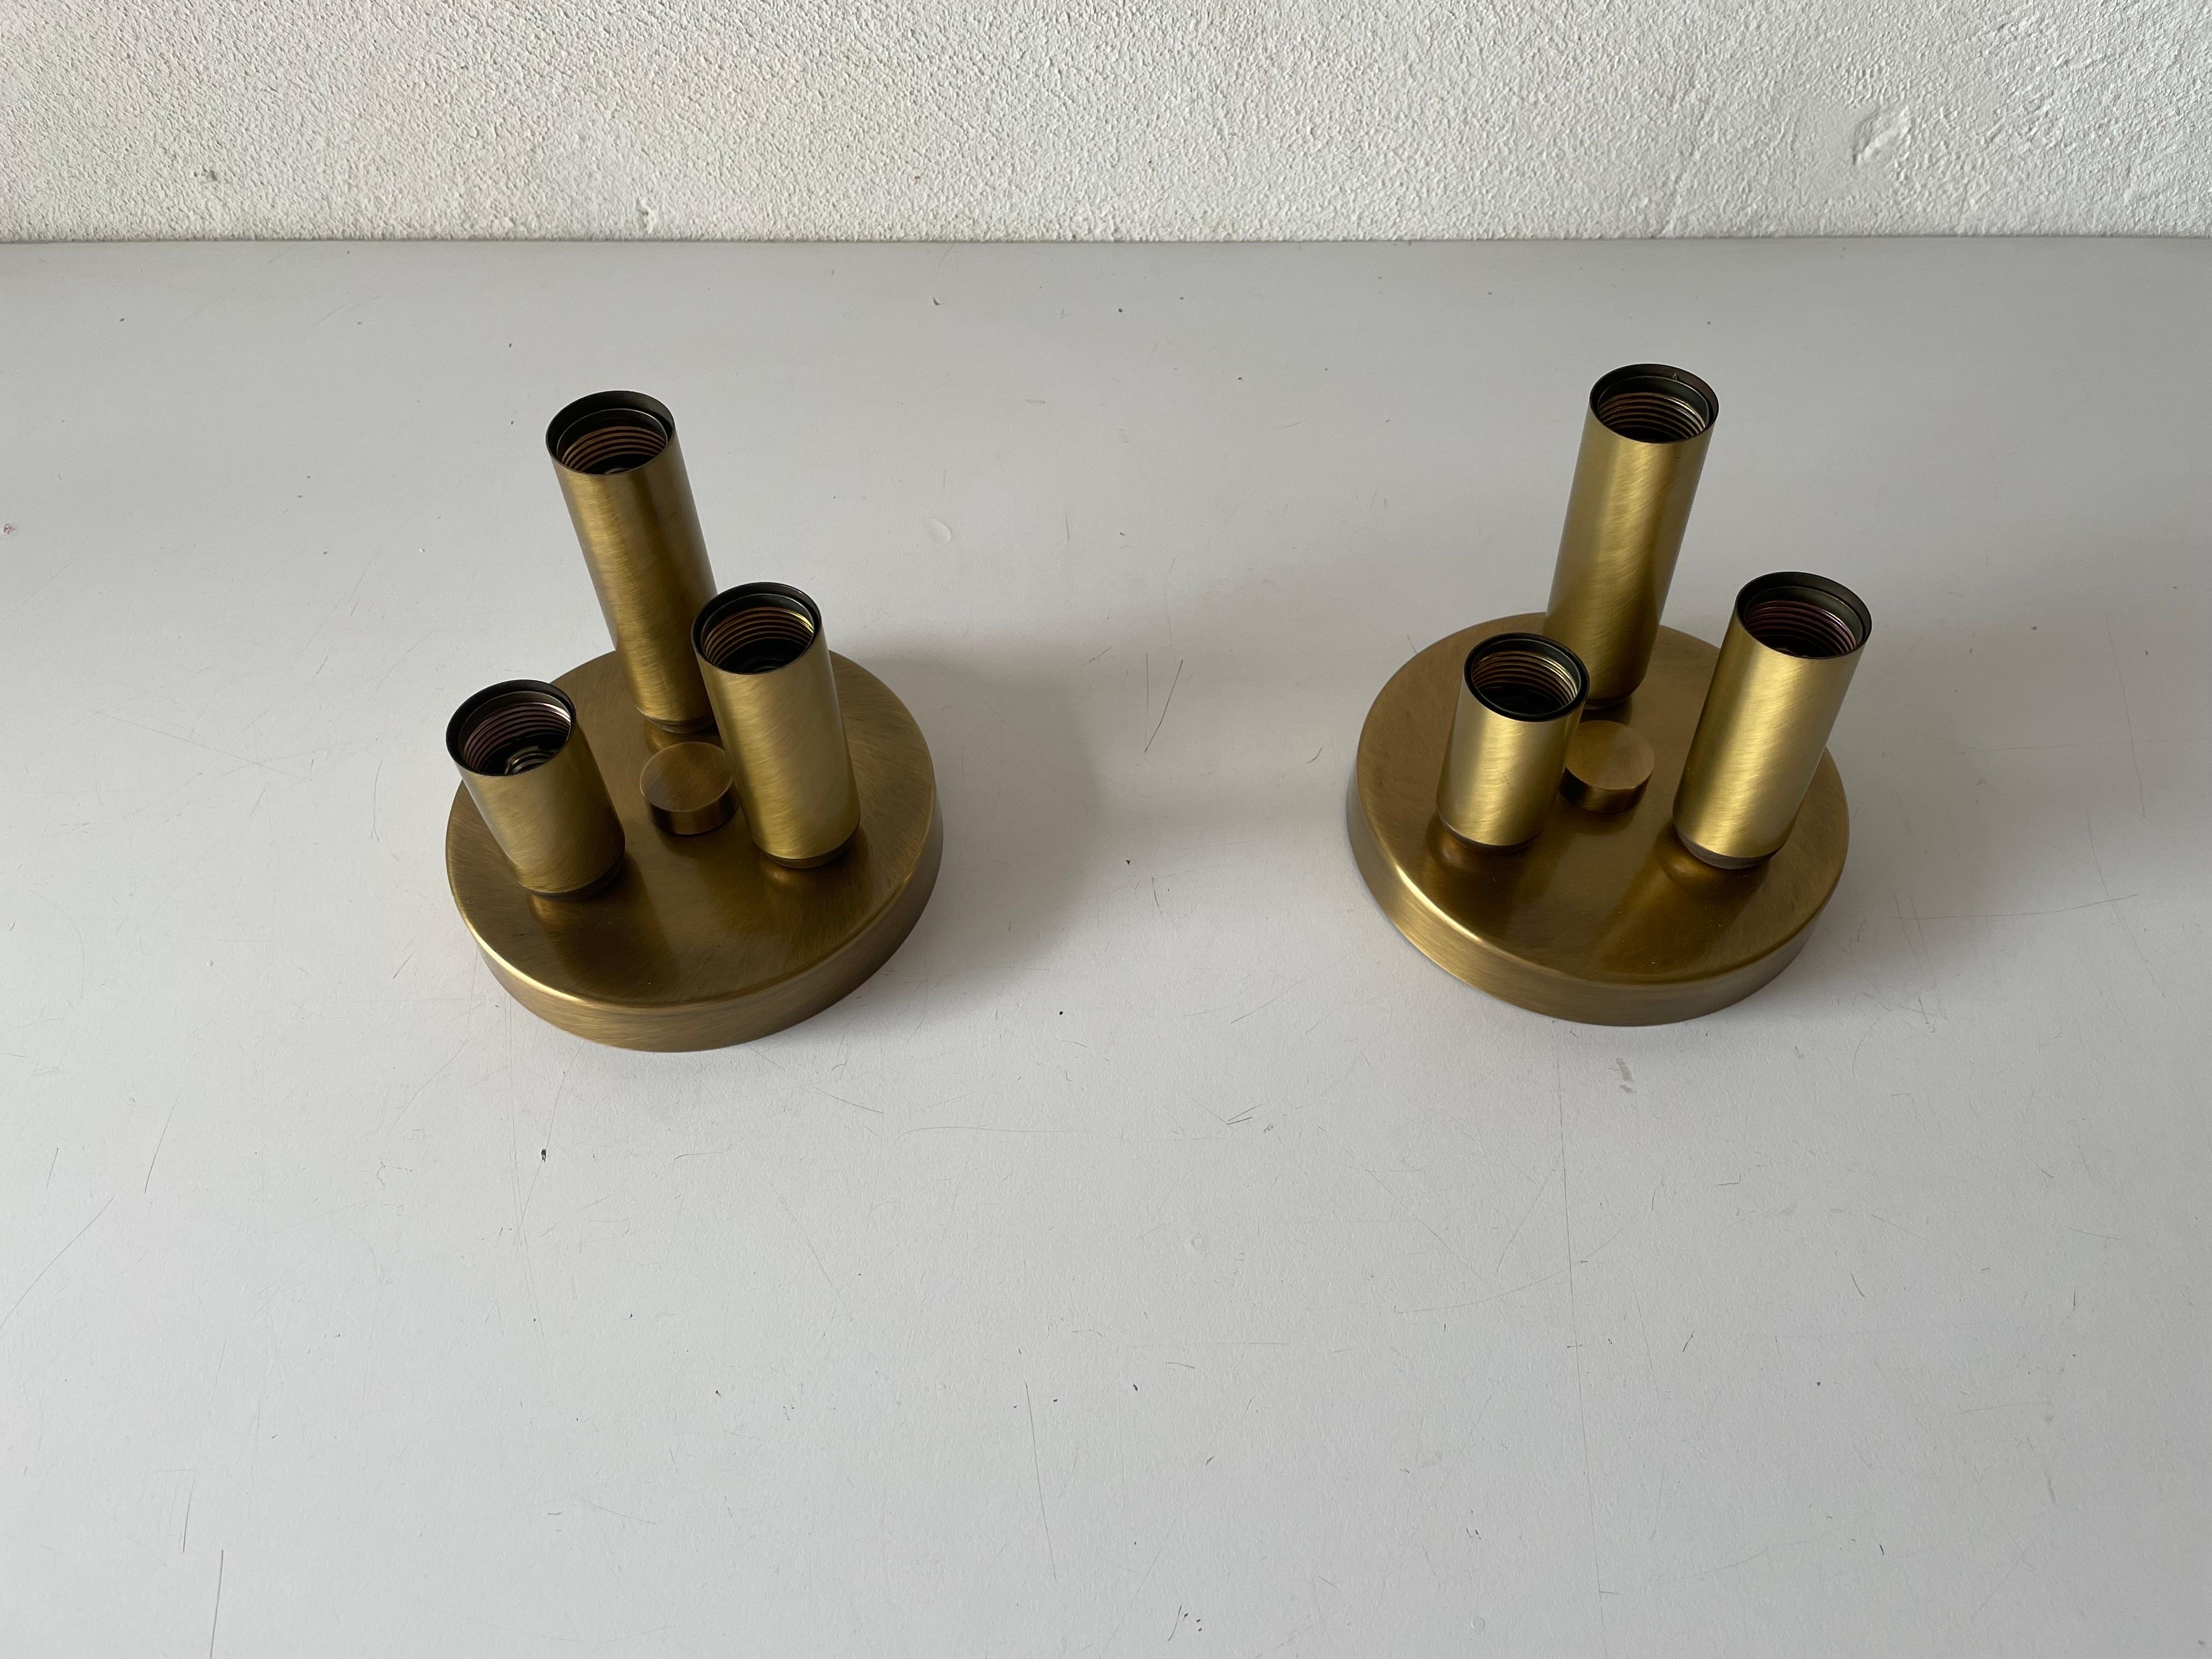 Rare Space Age Antique gold metal triple tube mini pair of ceiling lamps by TZ, 1960s, Germany

Very elegant and Minimalist wall lamps

Lamps are in very good condition.

These lamps works with 3x E14 standard light bulbs. Max 40 W
Wired and